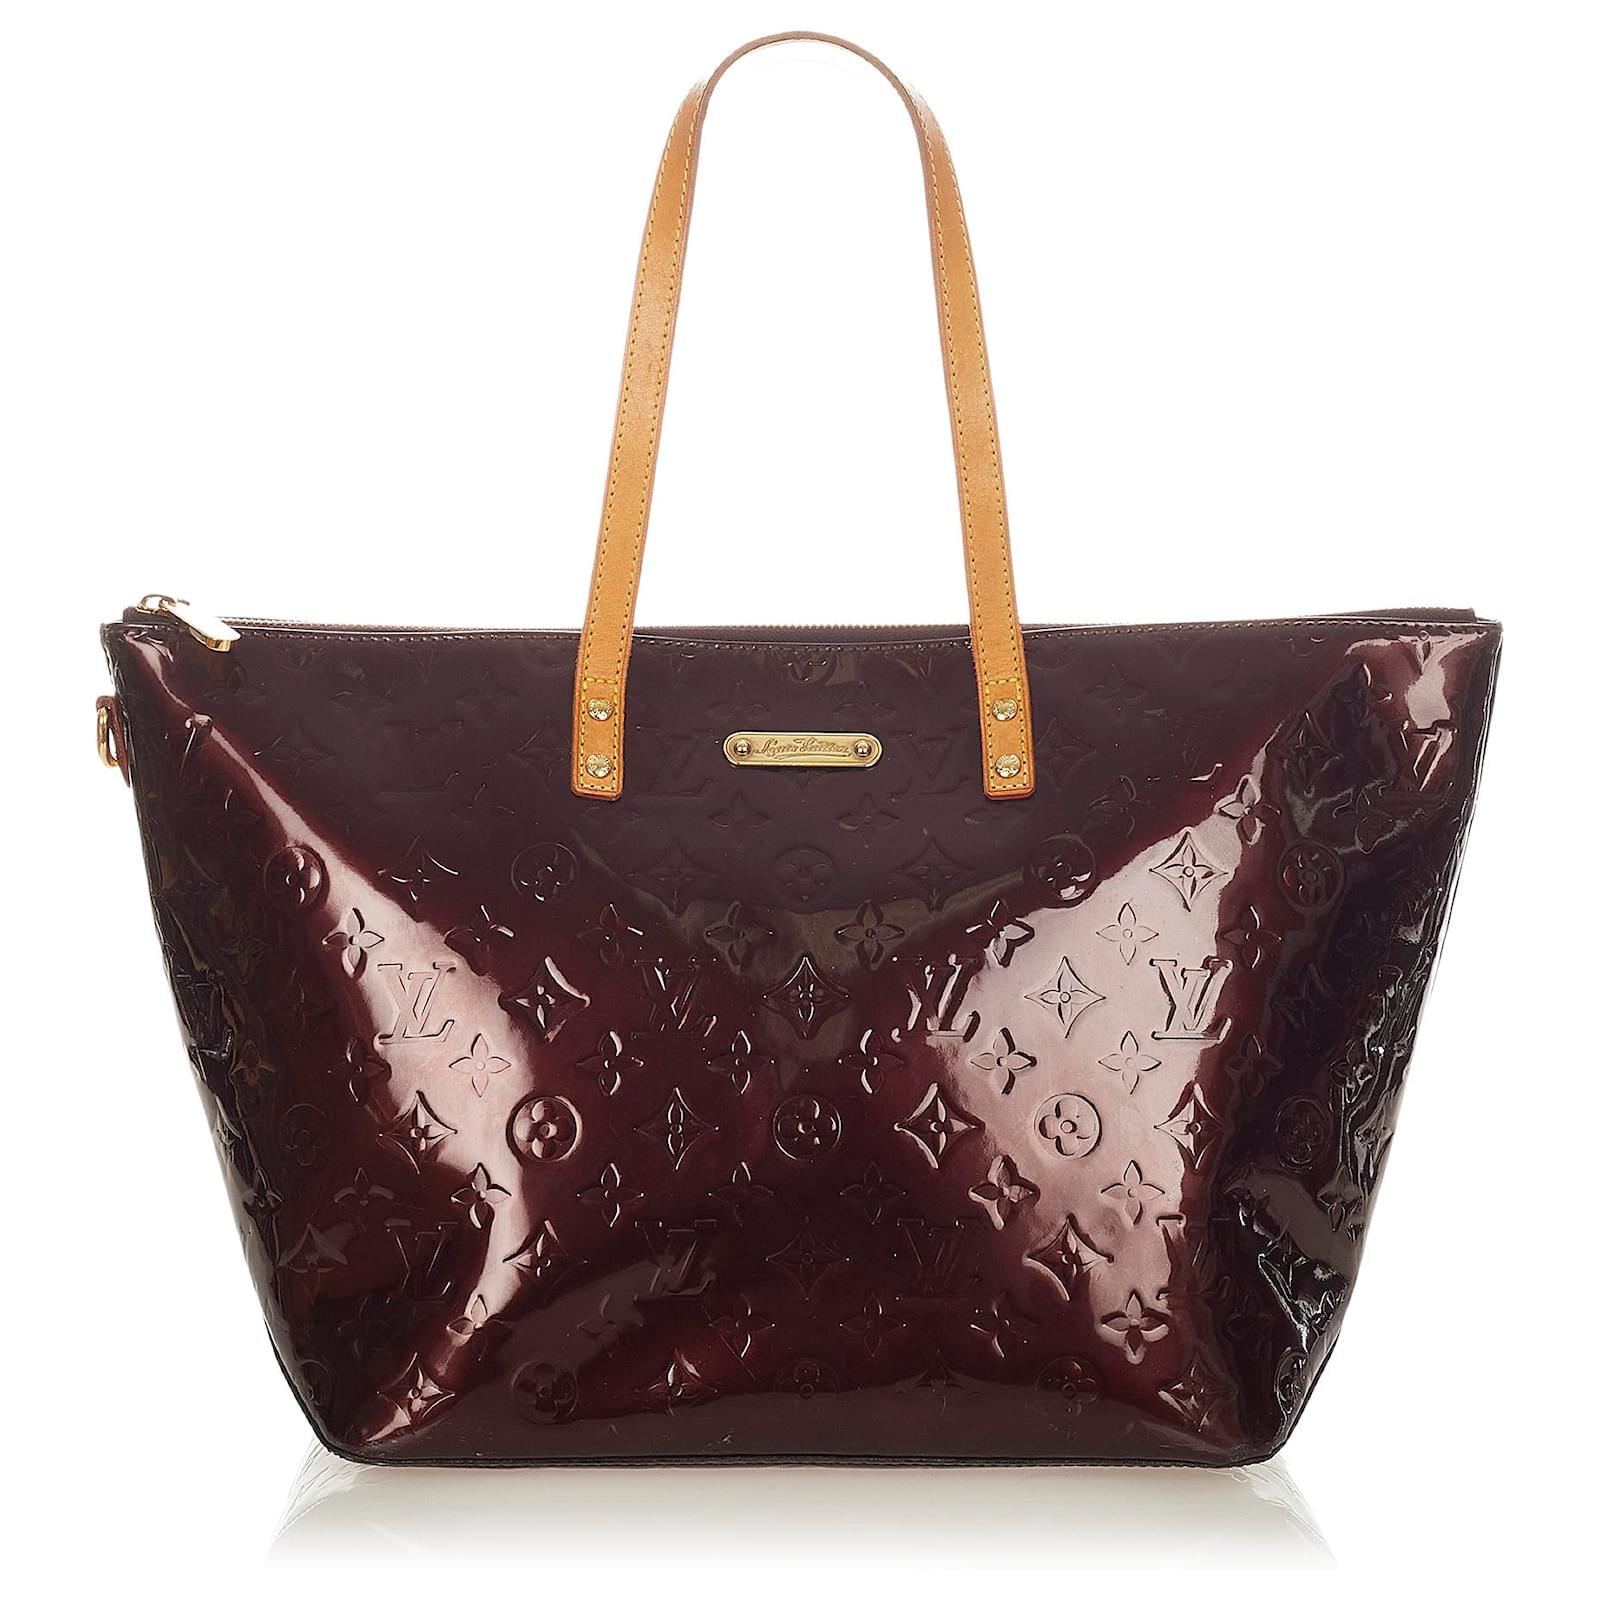 Louis Vuitton Bellevue PM Bag Patent Leather - burgundy red